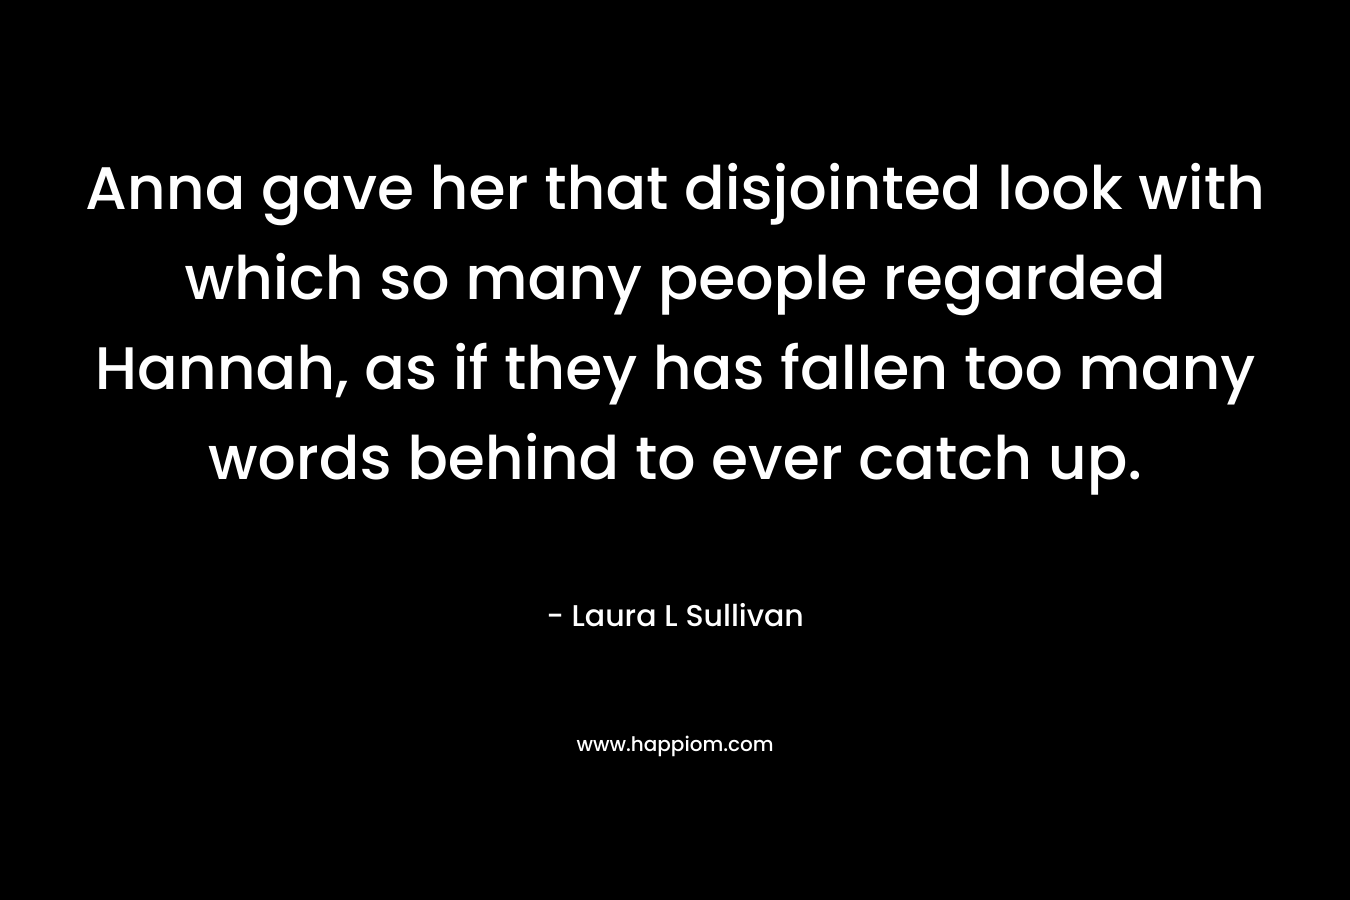 Anna gave her that disjointed look with which so many people regarded Hannah, as if they has fallen too many words behind to ever catch up. – Laura L Sullivan